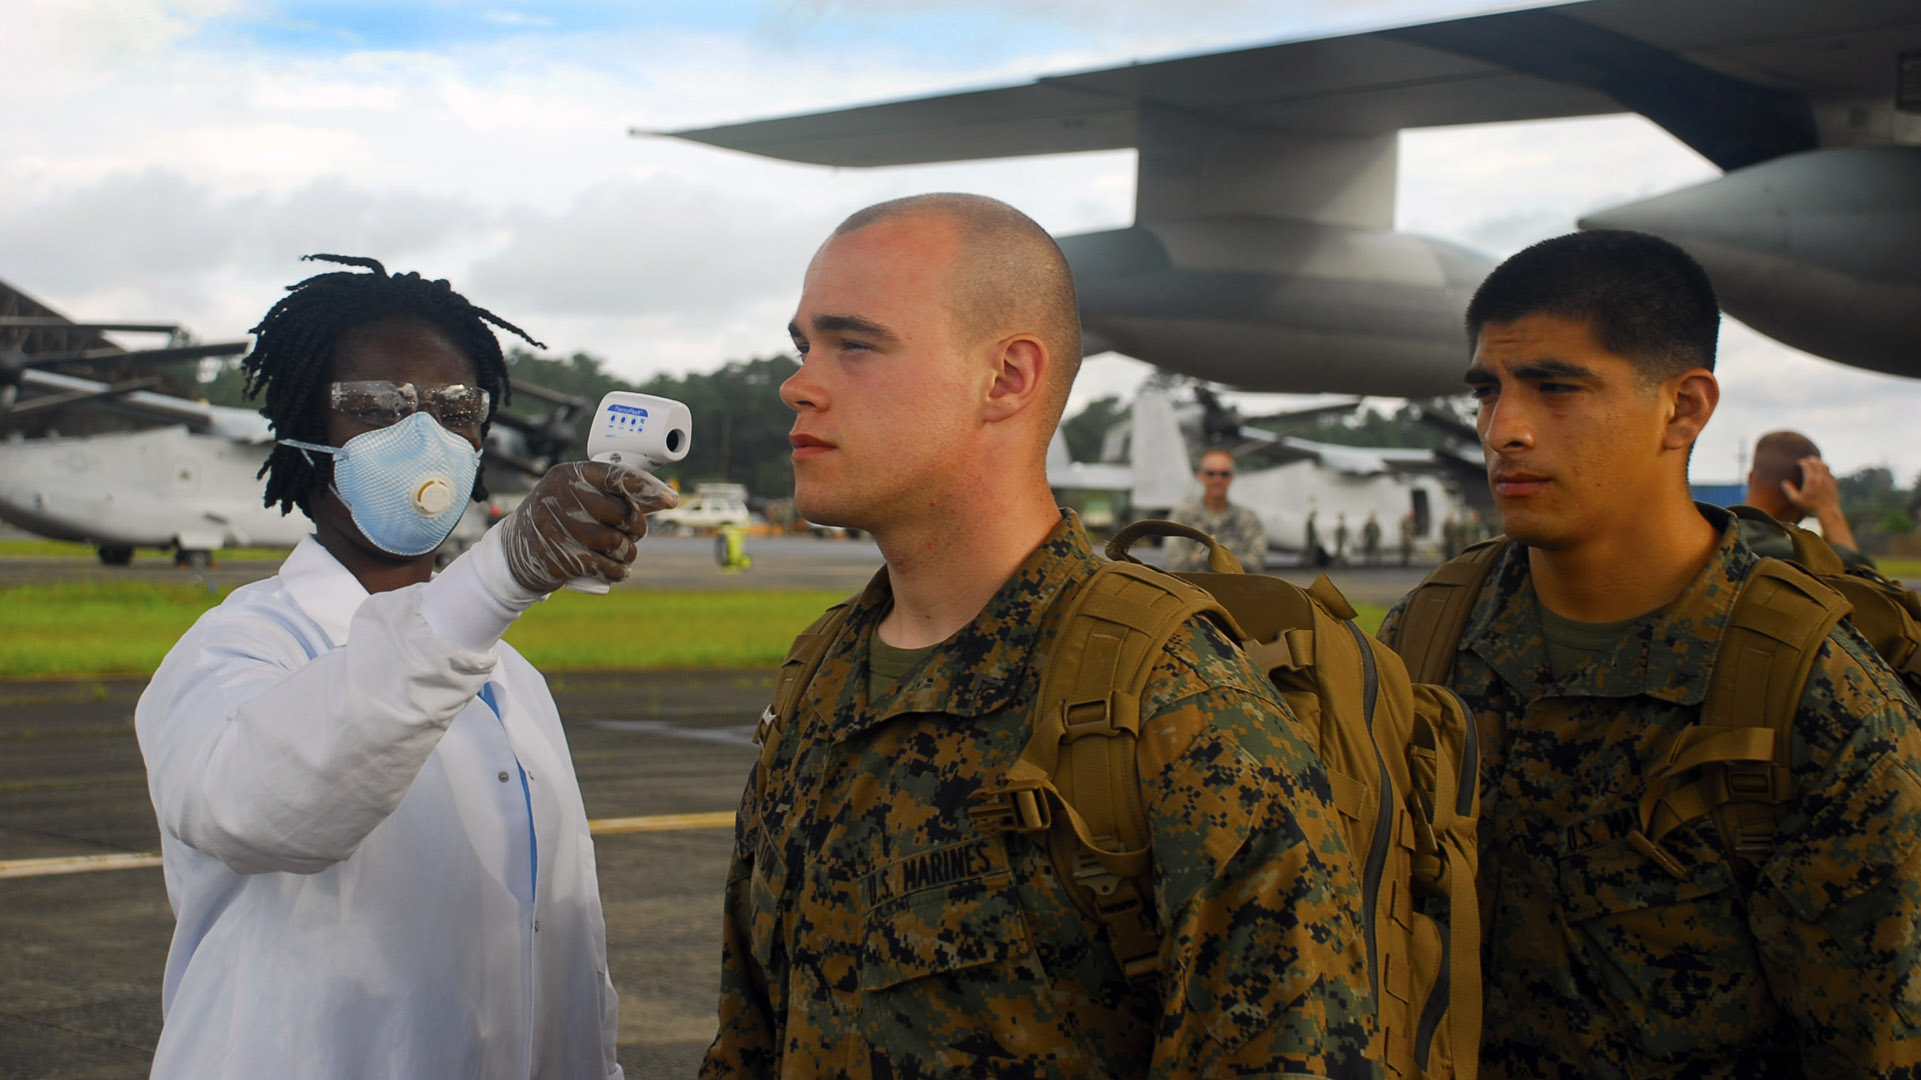 U.S. Marines and Soldiers enter a U.S. Marine Corps MV-22 aircraft after a site survey of a future Ebola Treatment Unit site near Barclayville, Grand Kru, Liberia. The U.S. Agency for International Development is the lead U.S. government organization for Operation United Assistance. The U.S. Army is supporting the effort by providing mission command, logistics, training and engineering support to contain the Ebola virus outbreak. (Photo by Pfc. Craig Philbrick/U.S. Army)